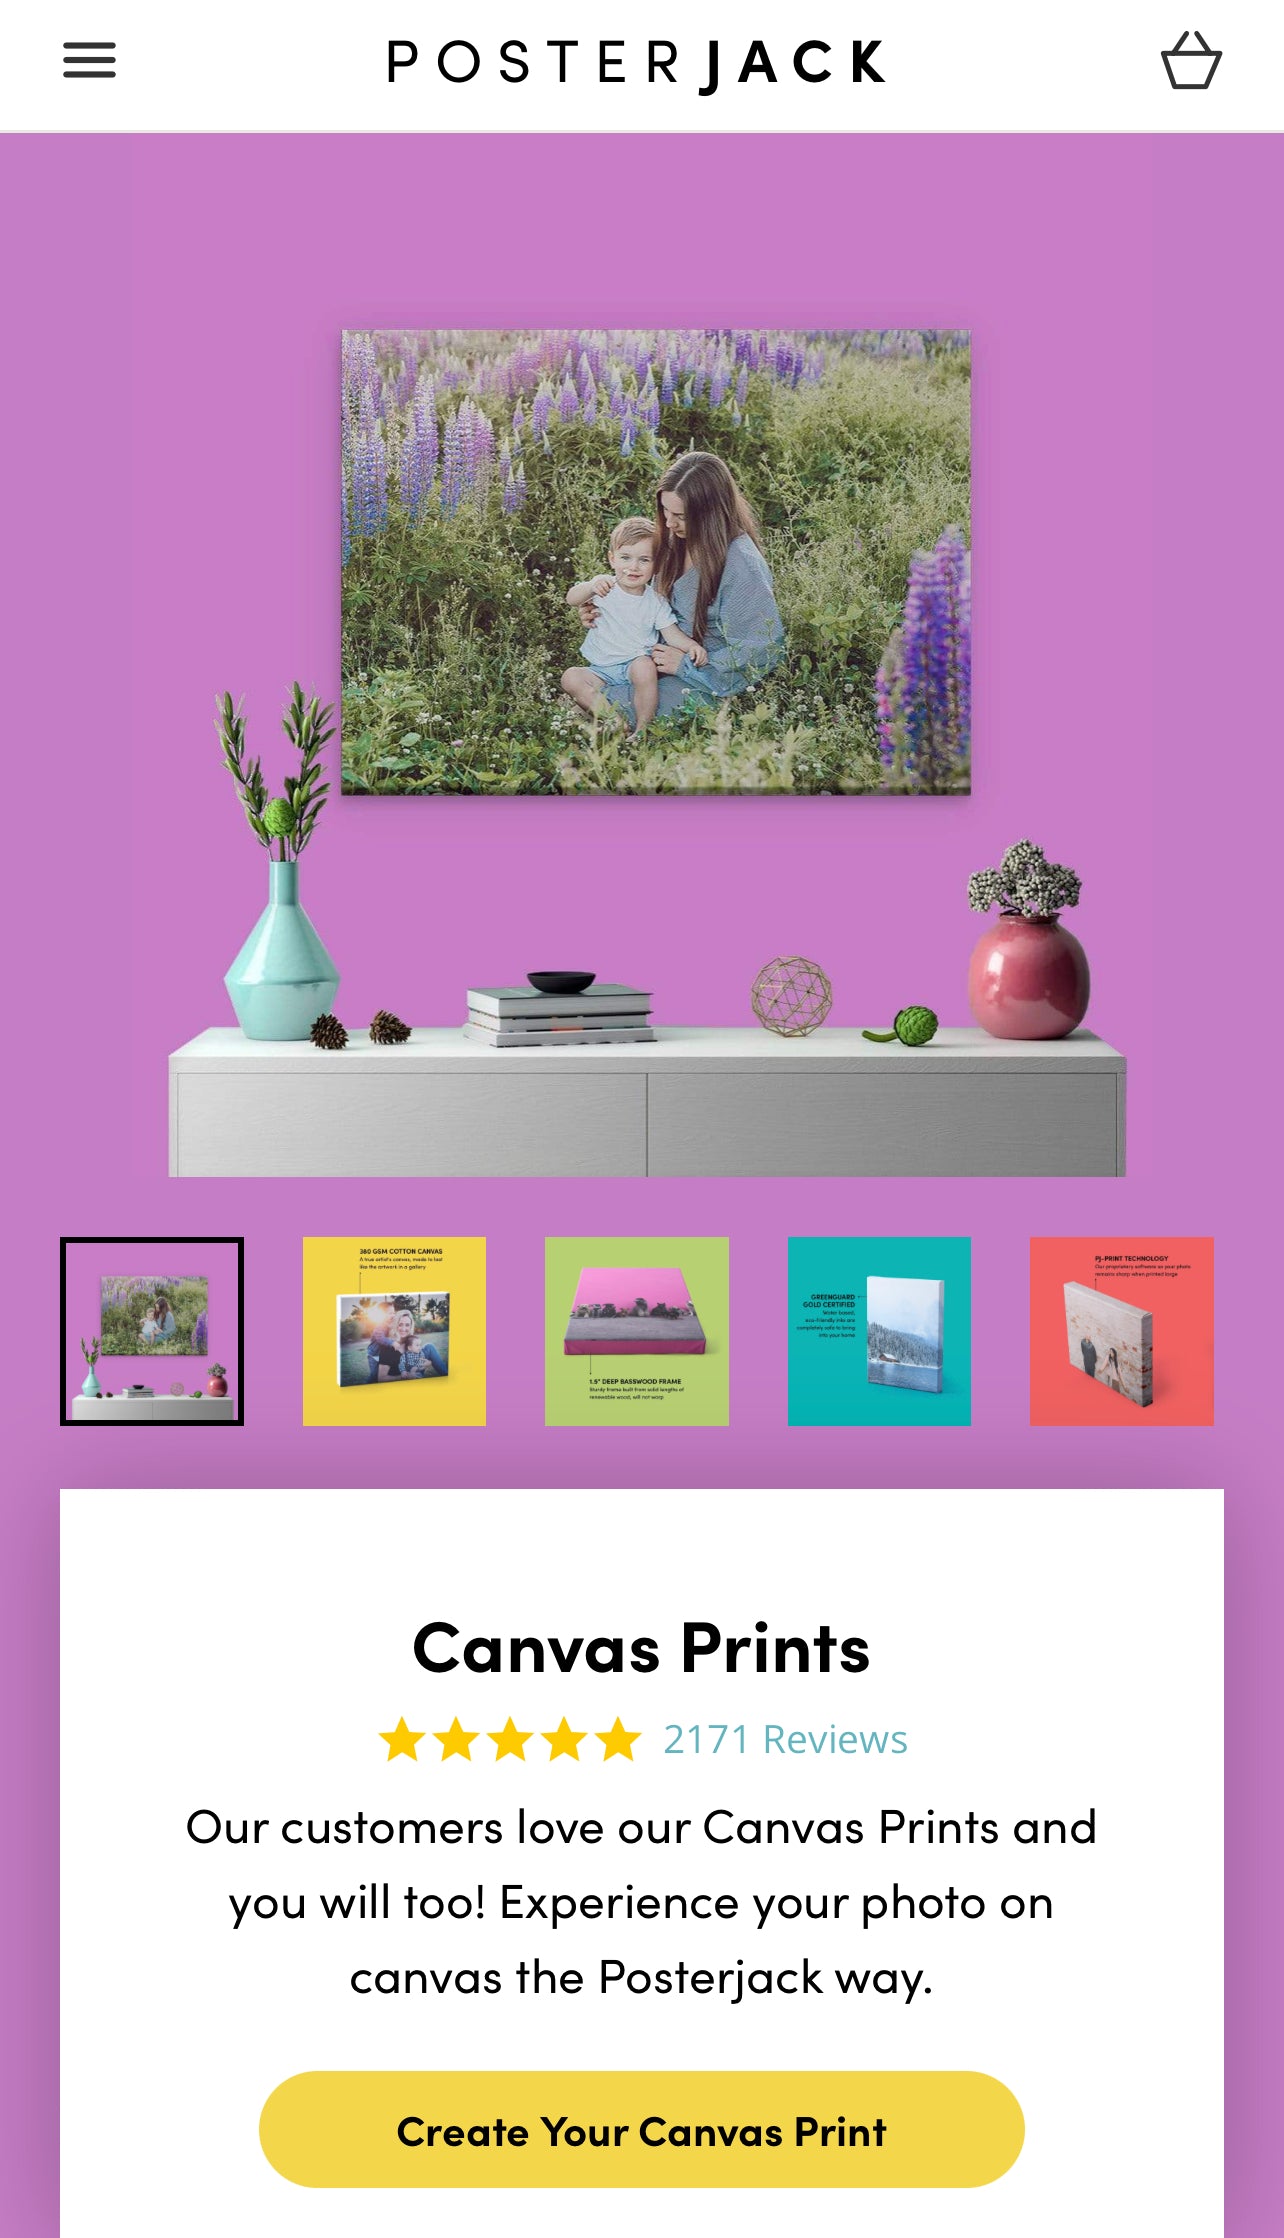 how to upload a picture to canvas assignment from phone